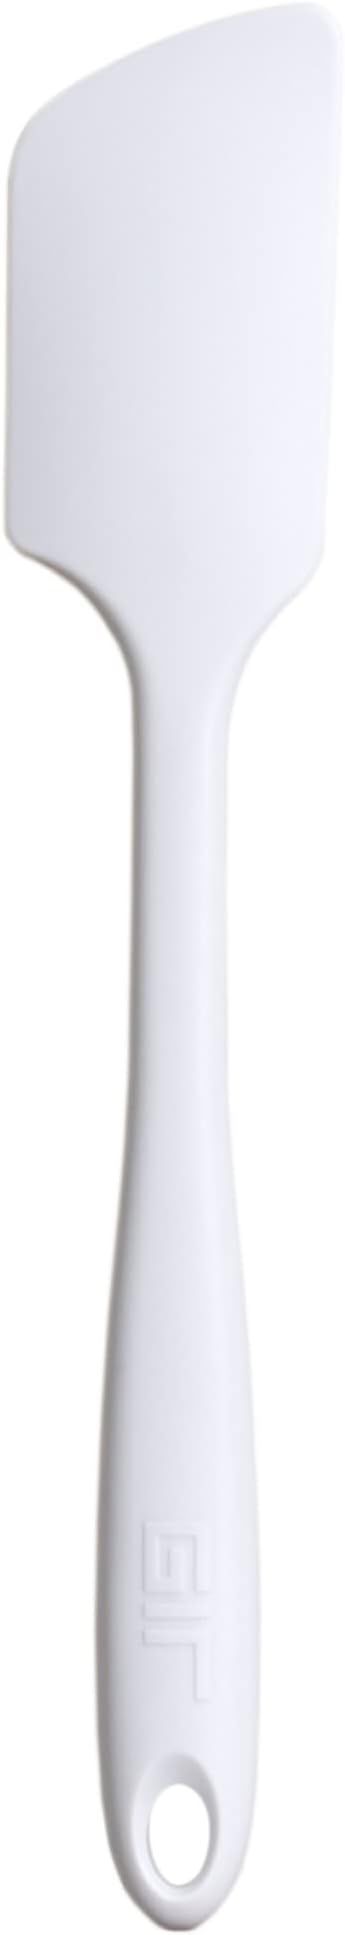 GIR: Get It Right Premium Silicone Ultimate Spatula, 11 Inches, Studio White by GIR: Get It Right | Amazon (US)